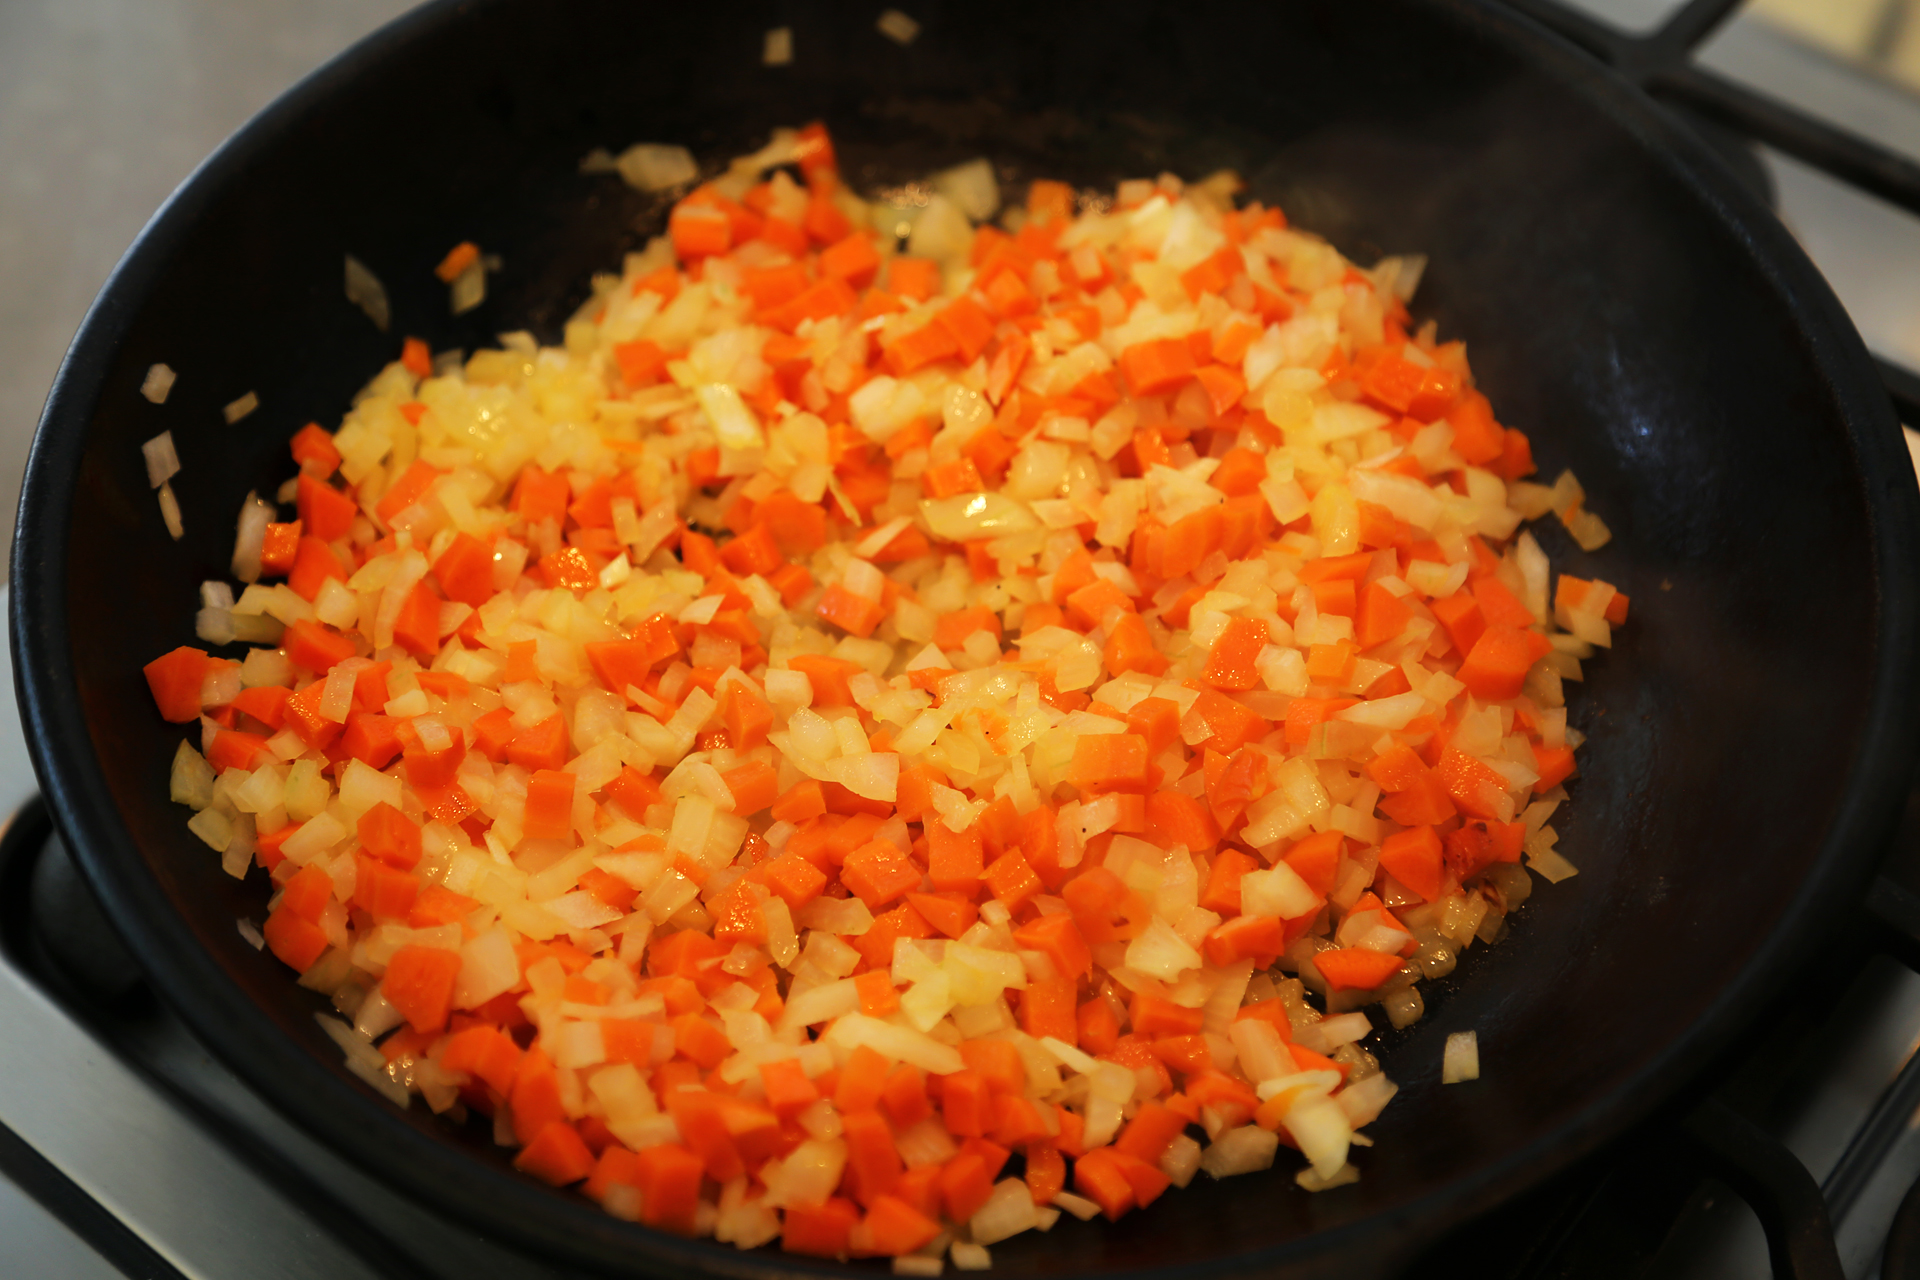  Add the onion and carrots and a pinch of salt. Cook, stirring, until tender and golden, about 10 minutes.